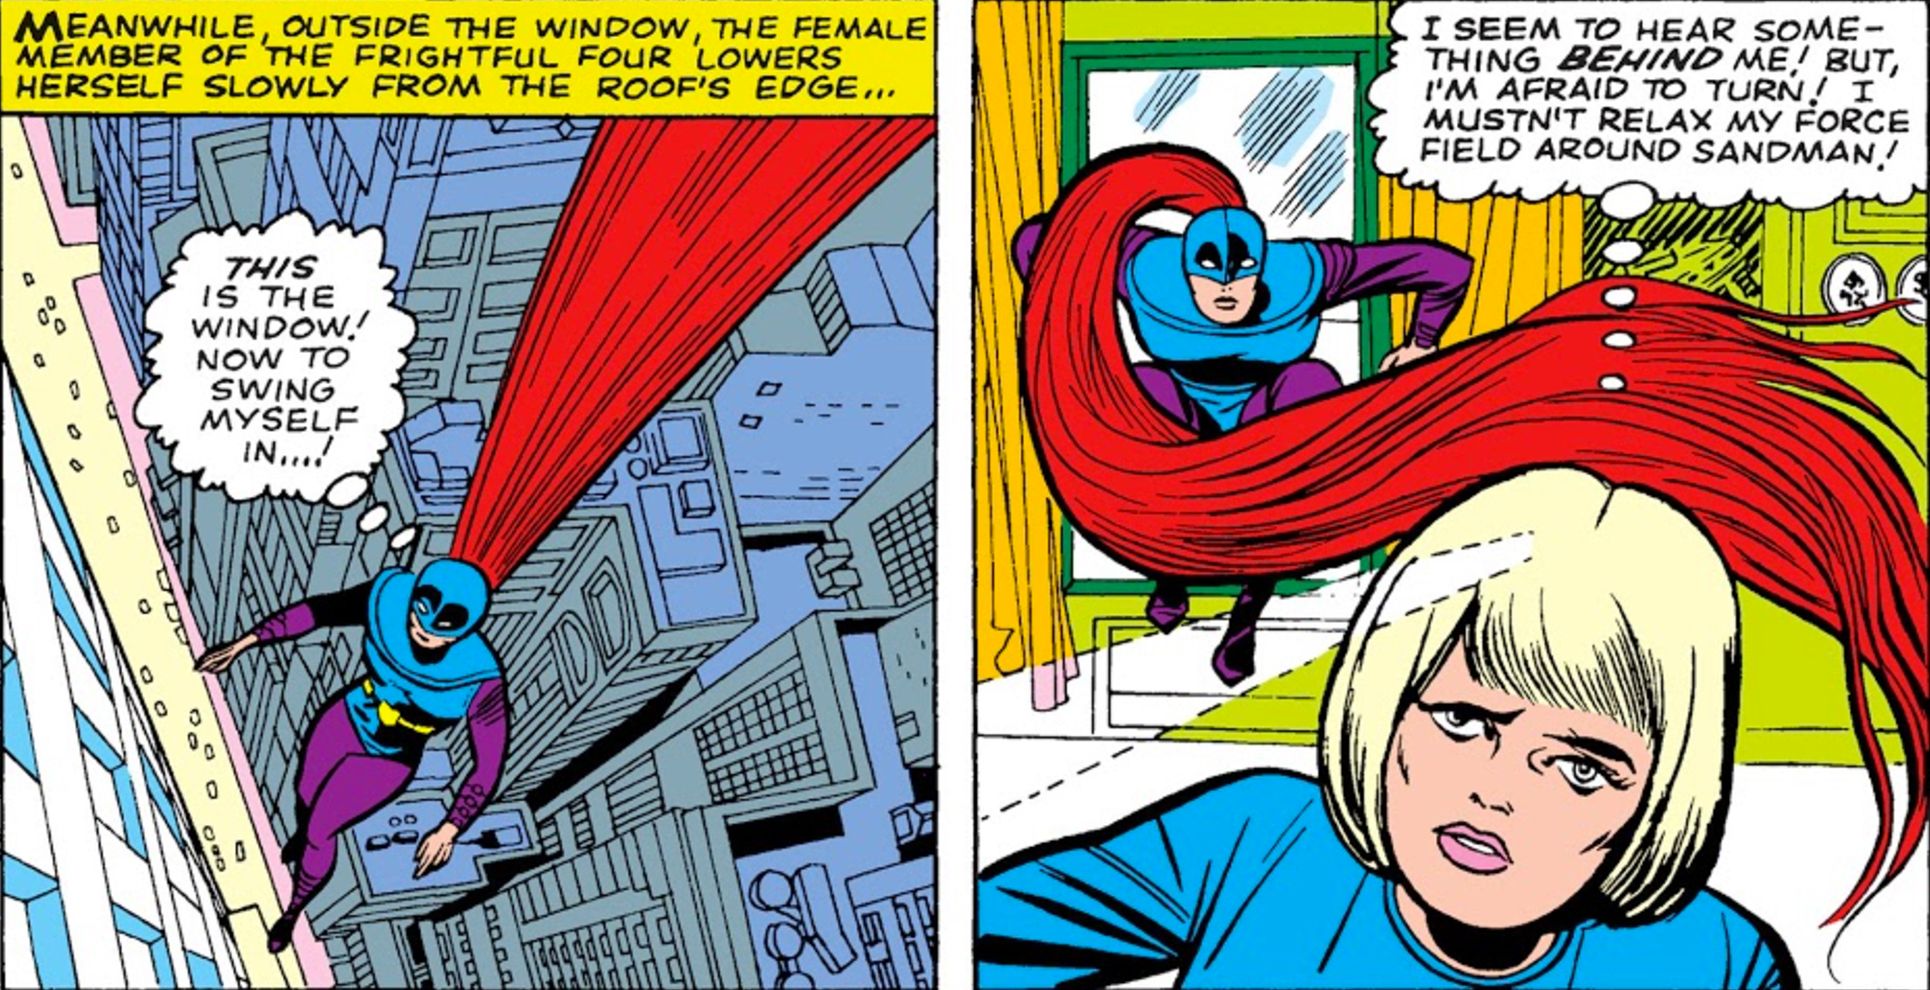 Medusa As A Member Of The Frightful Four in Fantastic Four 36